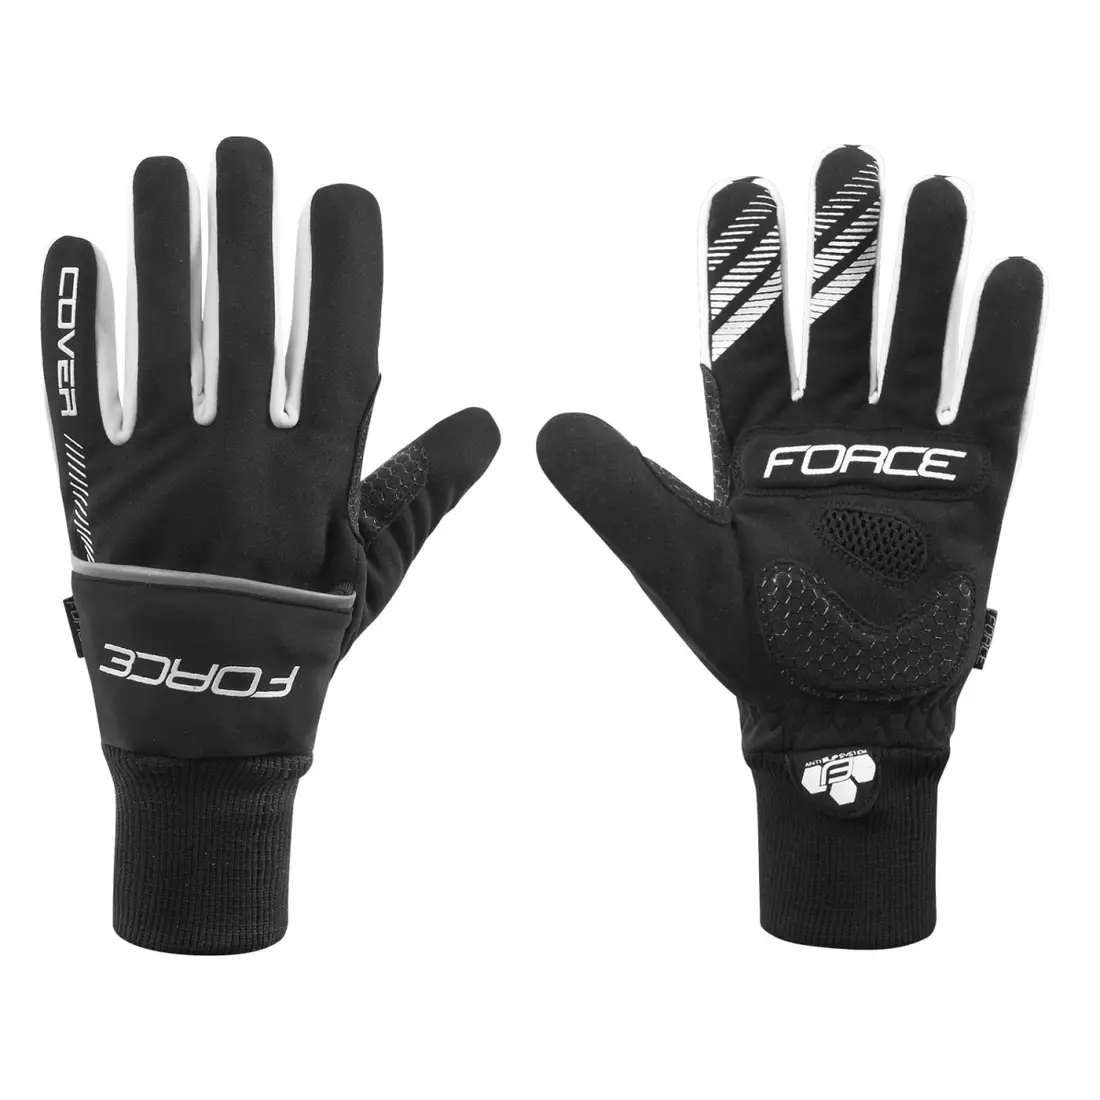 FORCE 90462 COVER winter cycling gloves, black